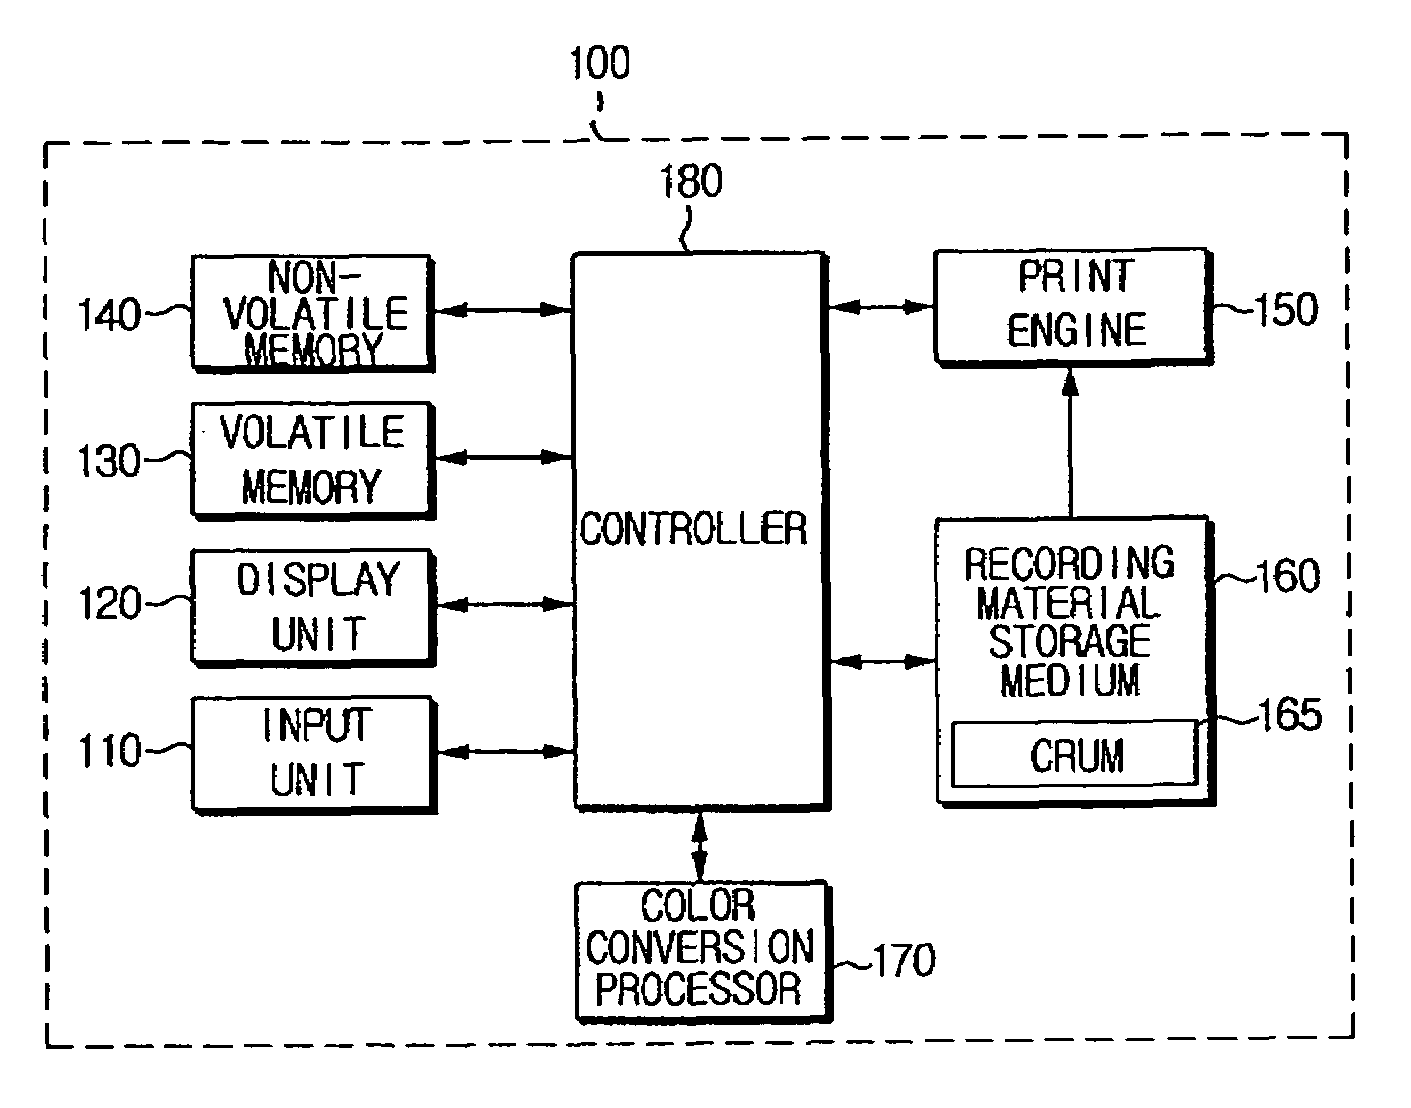 Image forming device and controlling method with recording material storage unit having replaceable memory storing color conversion tables selected based on image forming device status